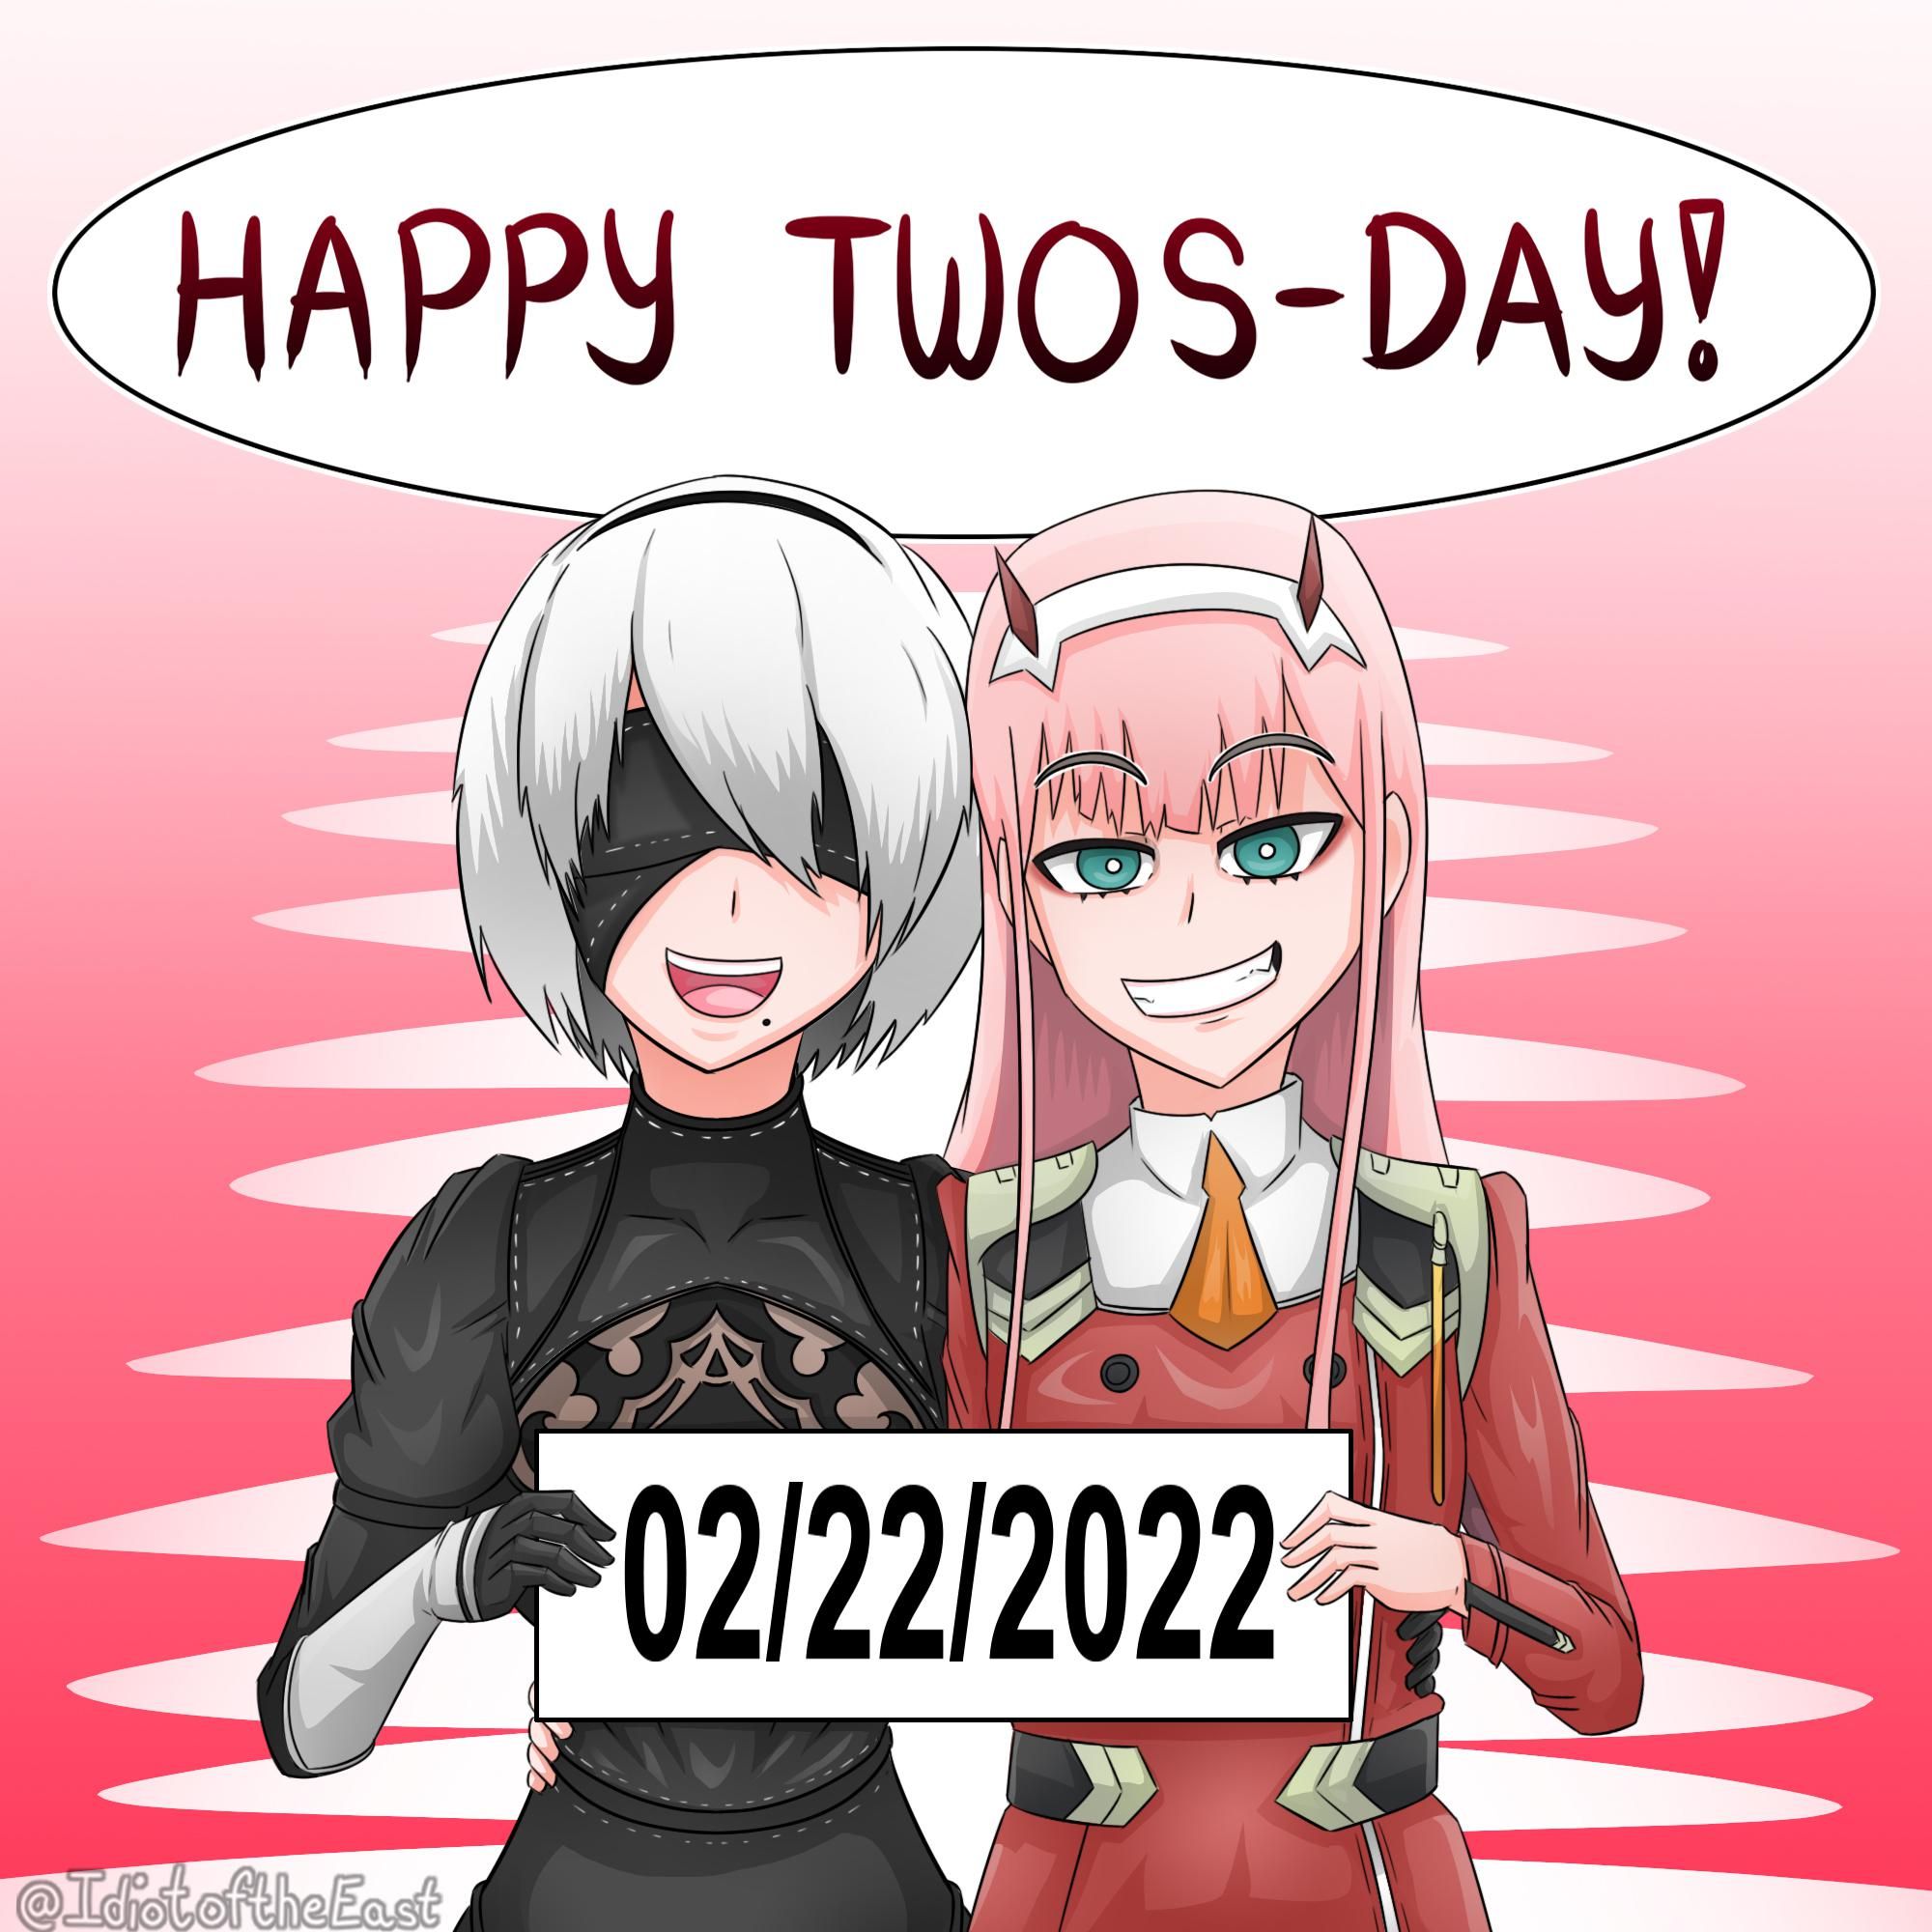 2B and Zero Two greeting you a happy Twos-day in 02/22/22 with the two of them... two-ception